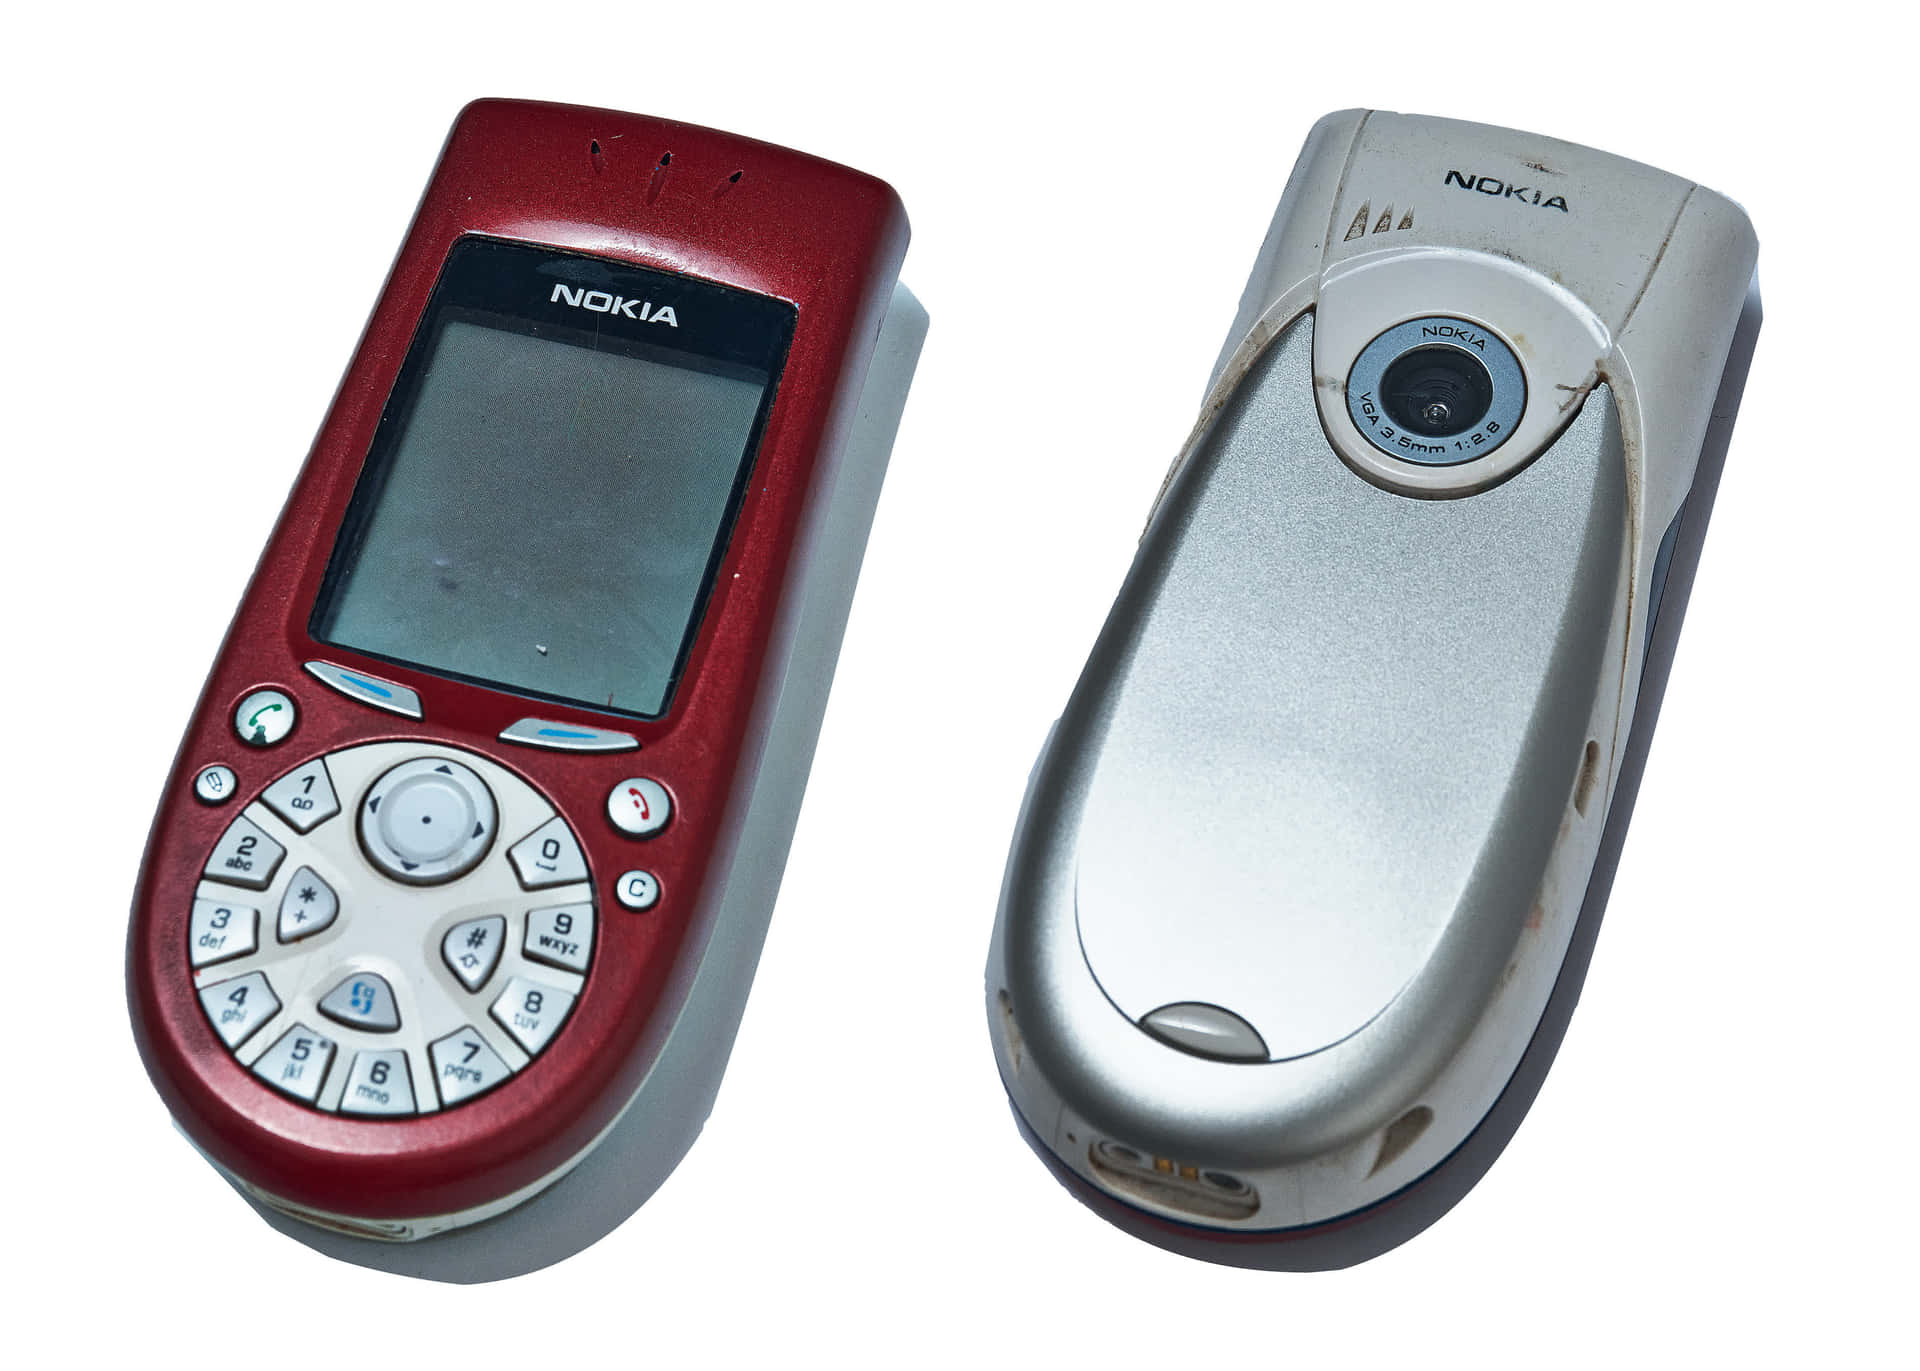 Innovation at its finest with Nokia 3800 X